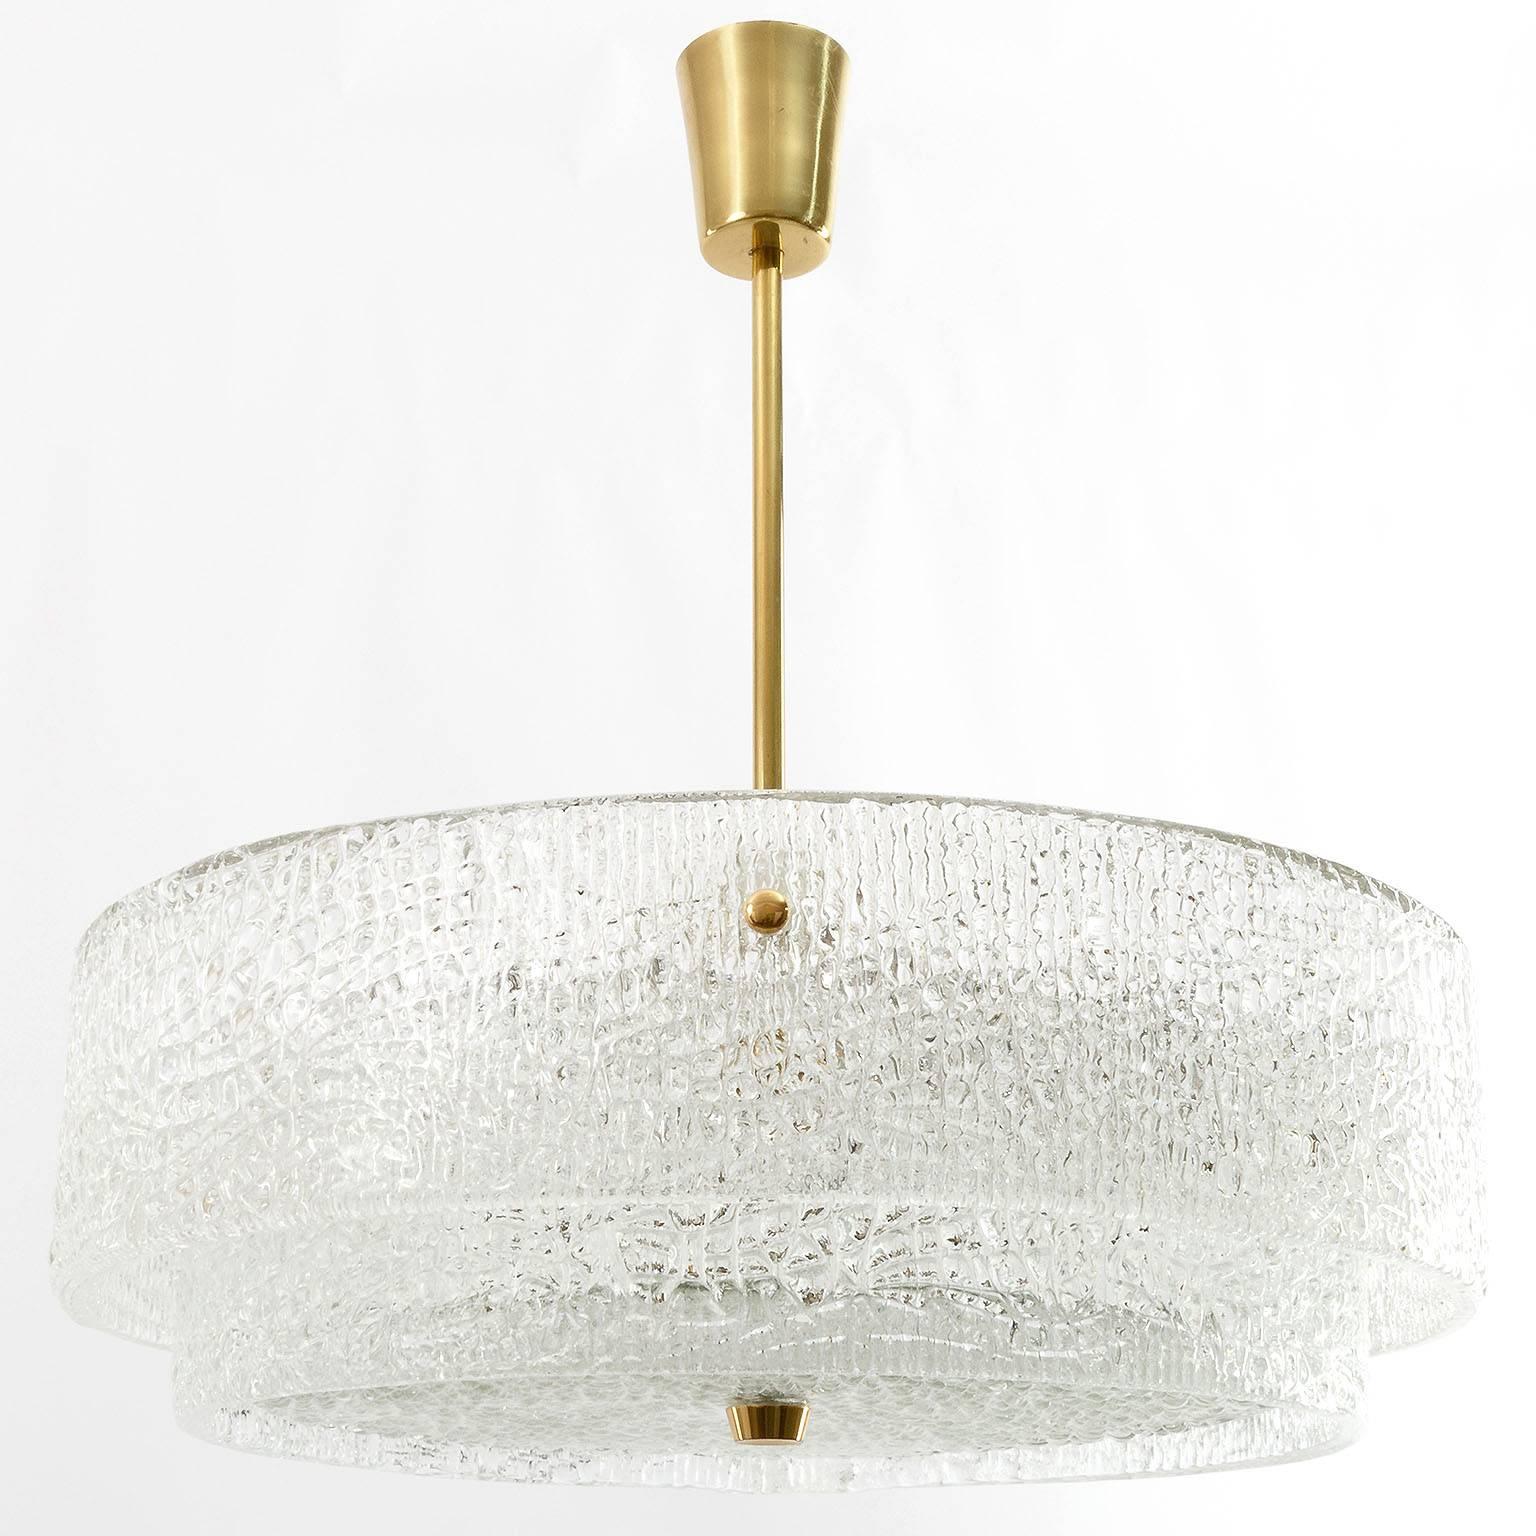 A beautiful textured glass and brass light fixture by J.T. Kalmar, Vienna, manufactured the 1950s. Thick textured glass creates a fantastic light effect. Six medium Edison base bulbs.
The stem and total drop can be customized to any size for free.